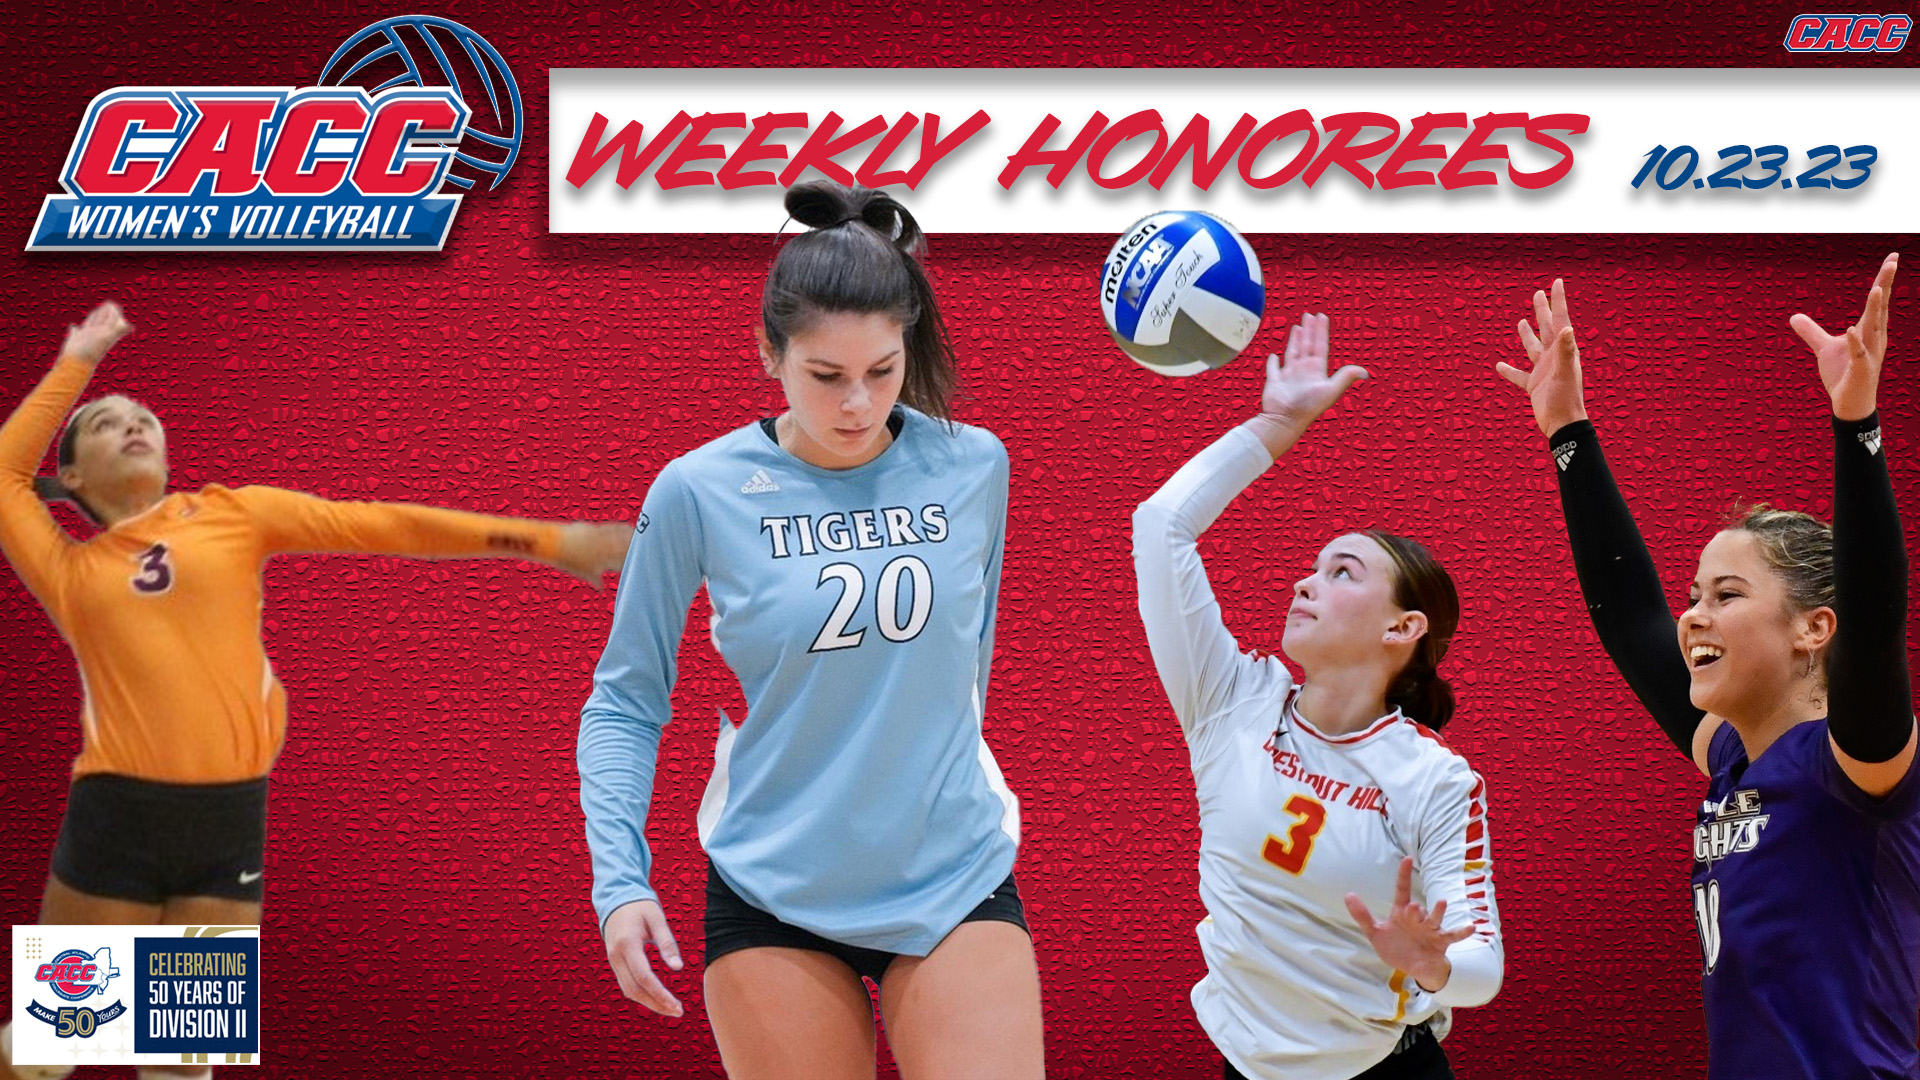 CACC Women's Volleyball Weekly Honorees (10-23-23)